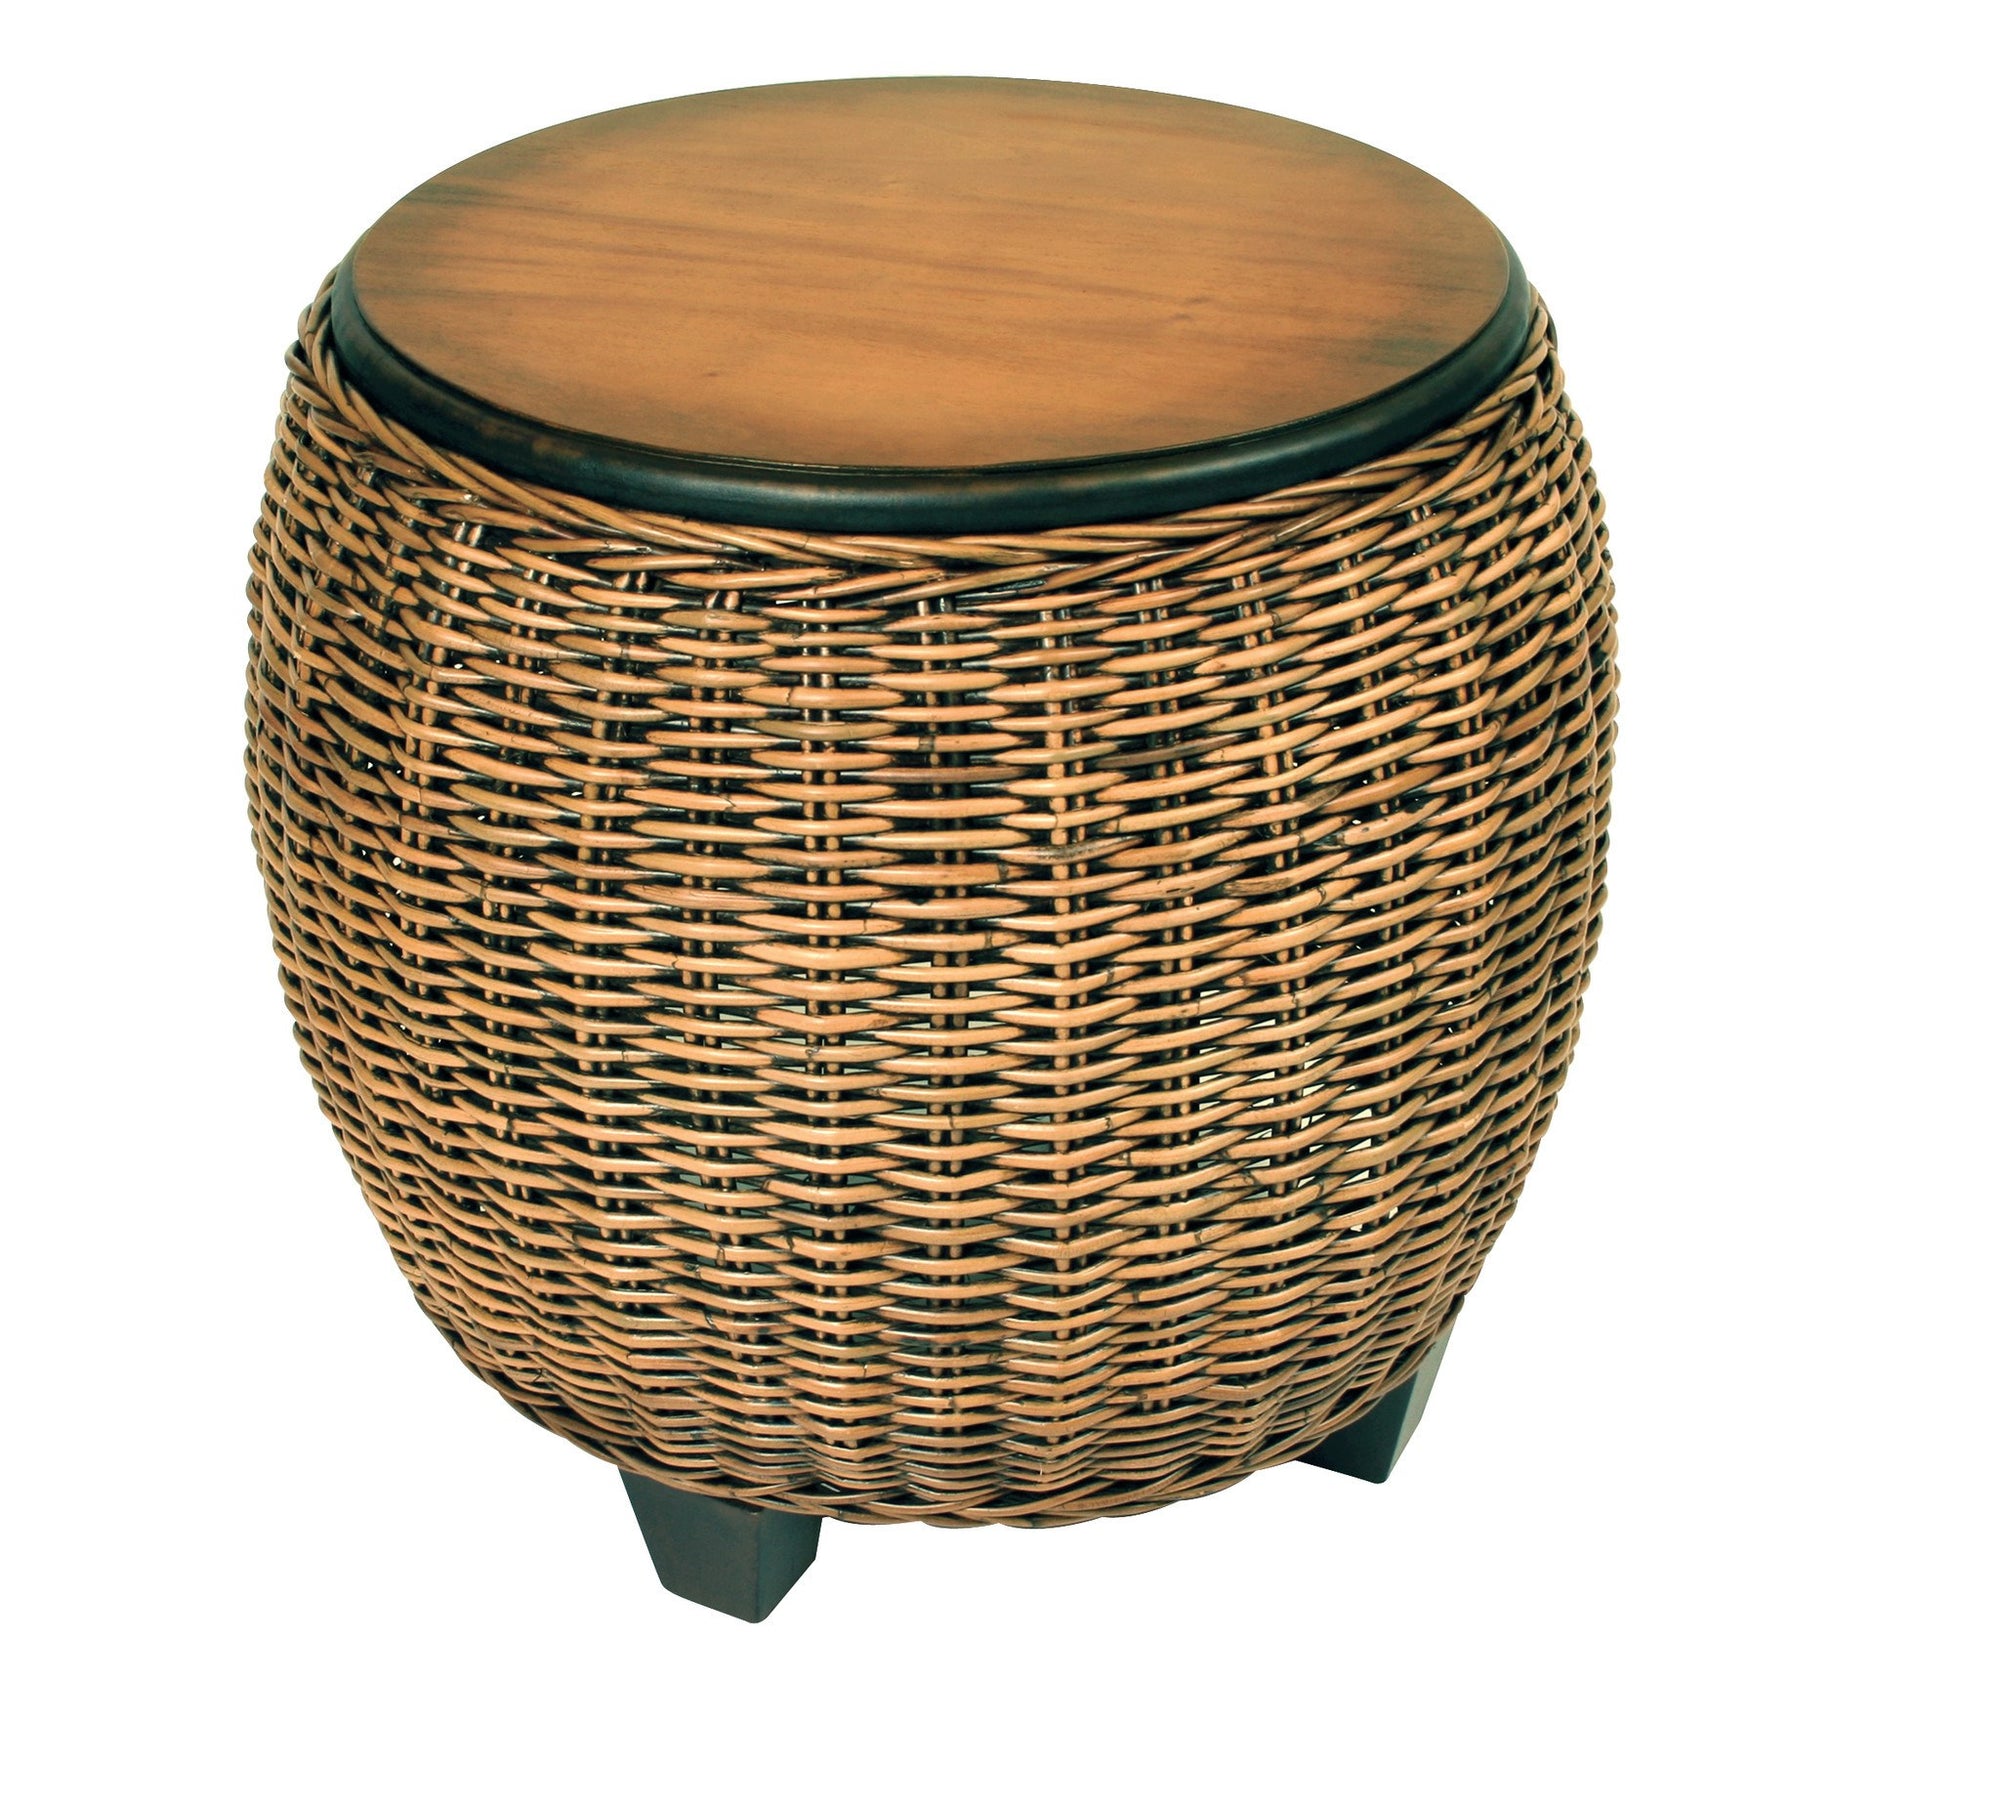 Designer Wicker & Rattan By Tribor Clarissa Porch End Table End Table - Rattan Imports